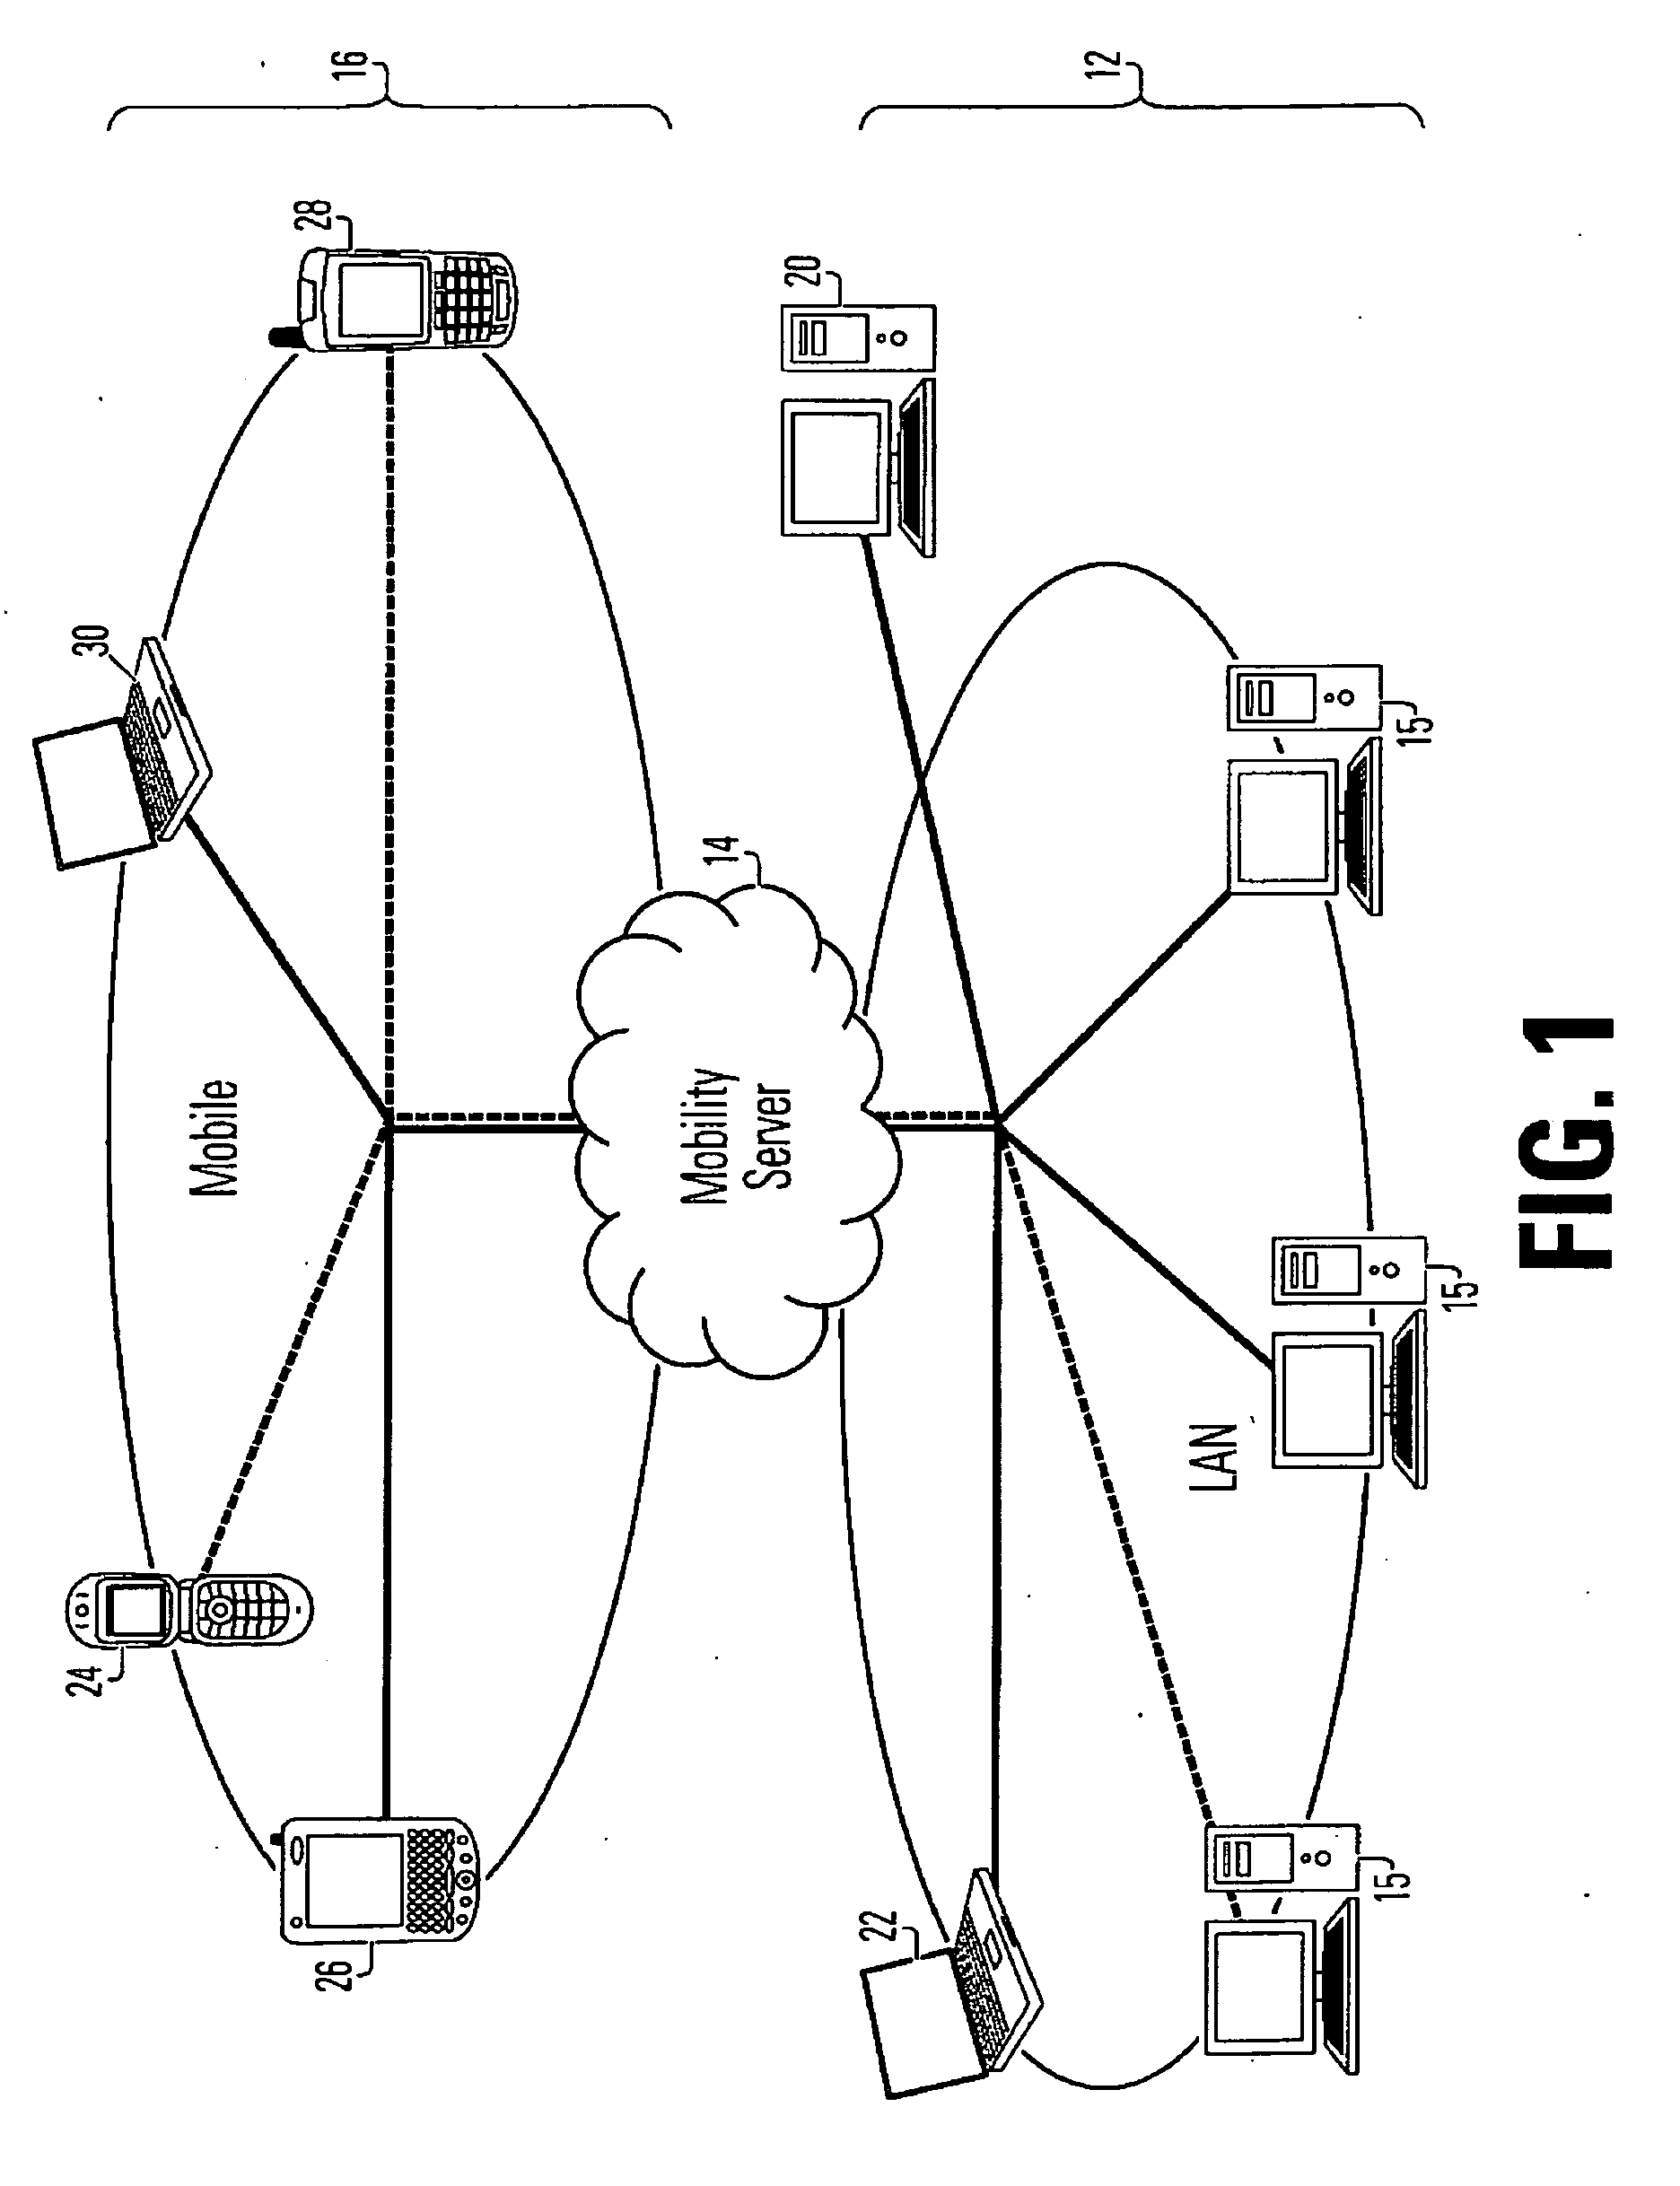 Method for distributing data, adapted for mobile devices